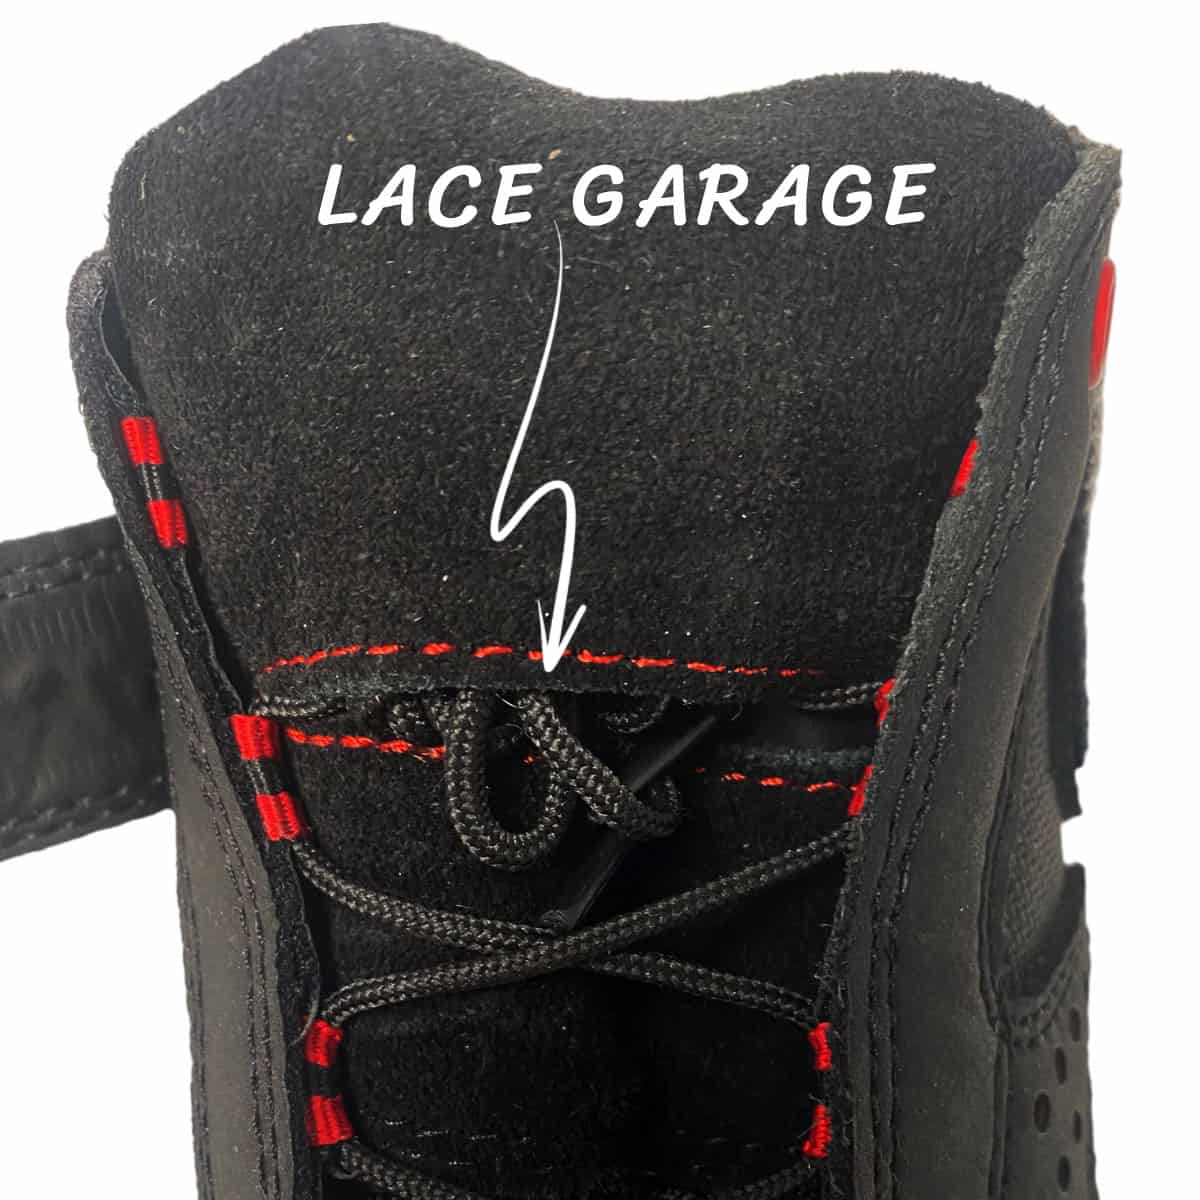 RST Frontier CE Boots: Breathable summer motorcycle boots - lace garage